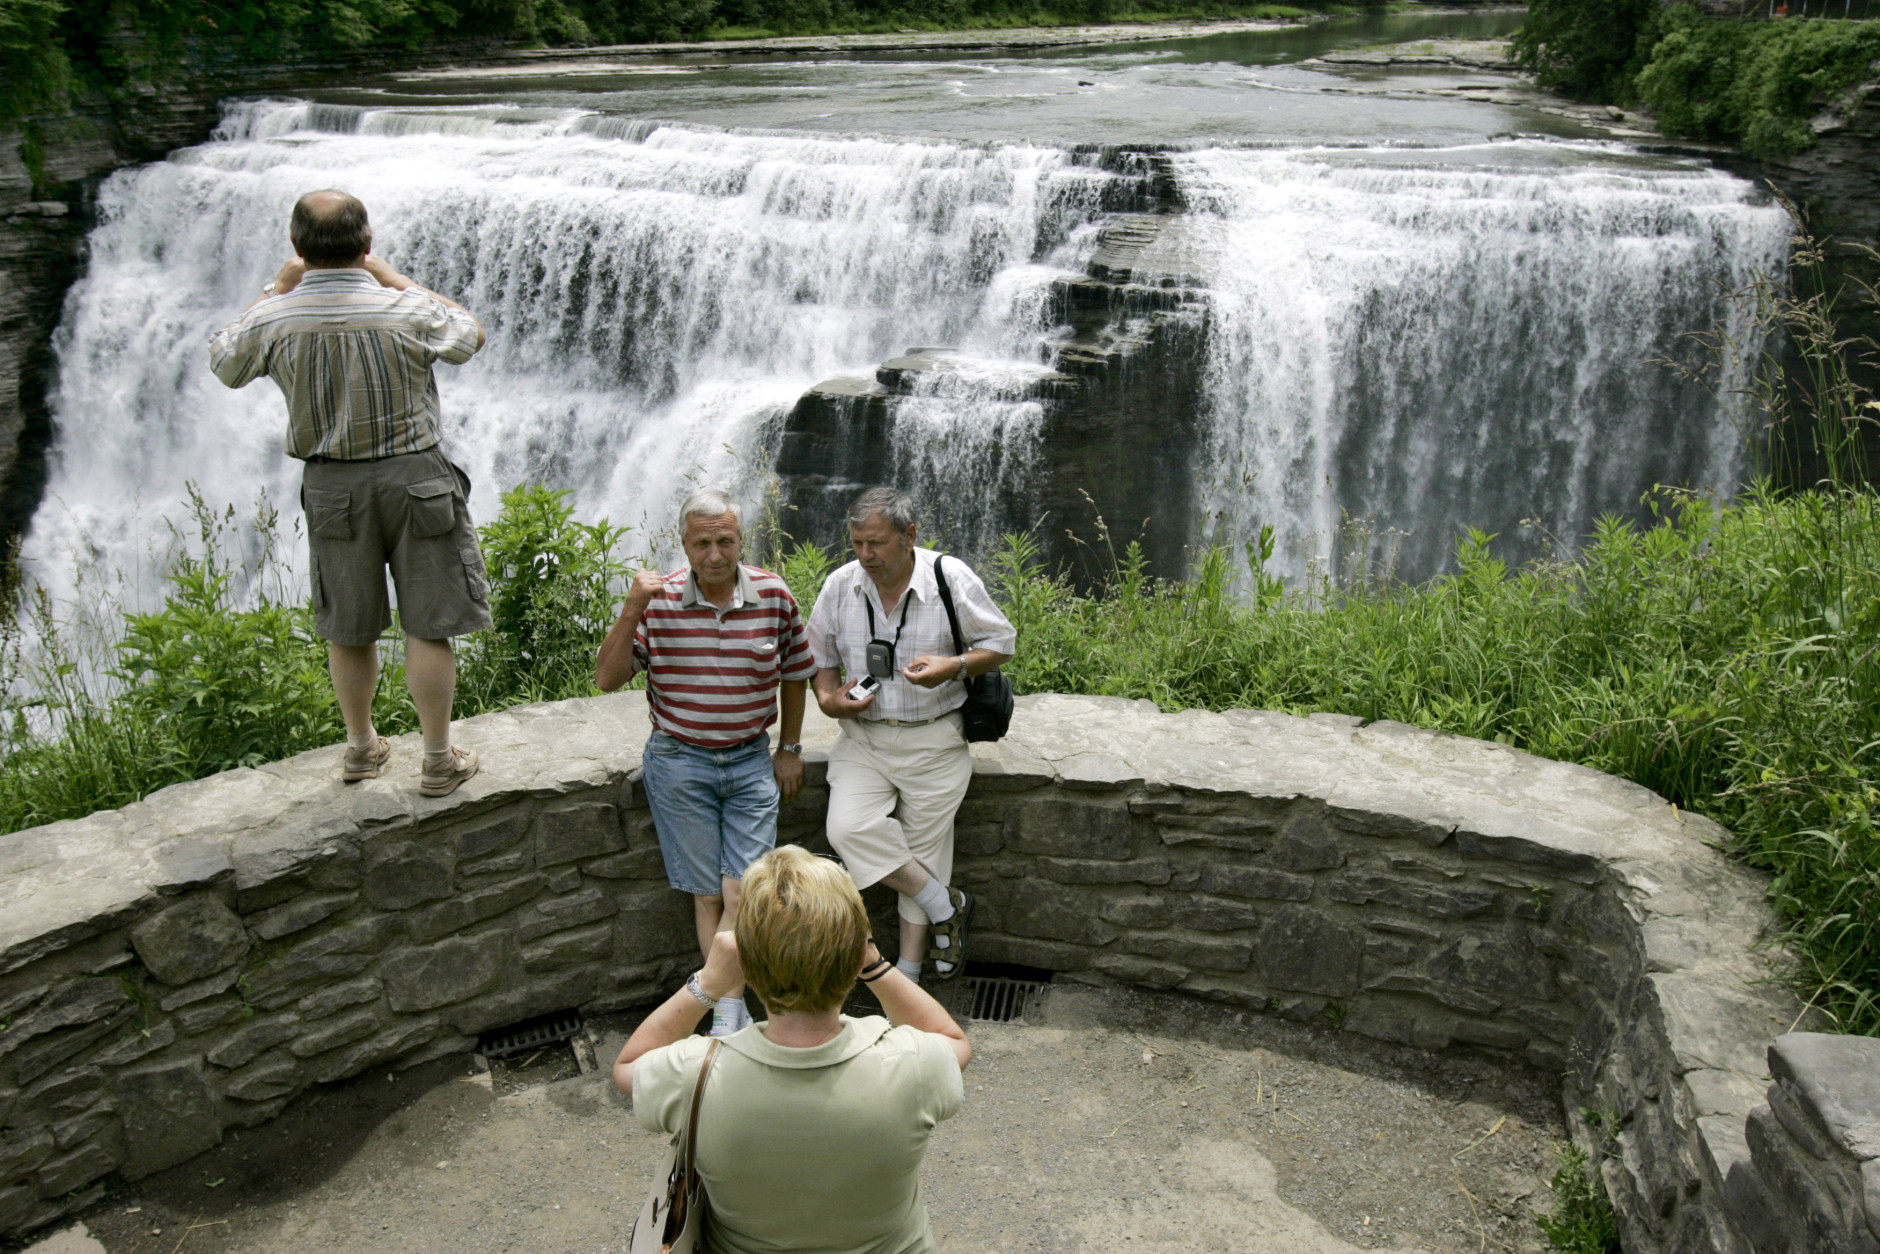 ** FOR IMMEDIATE RELEASE **Tourists from the Czech Republic photograph the Middle Falls during a bus tour at Letchworth State Park in Castile, N.Y., Wednesday, June 21, 2006. Letchworth State Park is one of New York's oldest and largest nature preserves. (AP Photo/David Duprey)